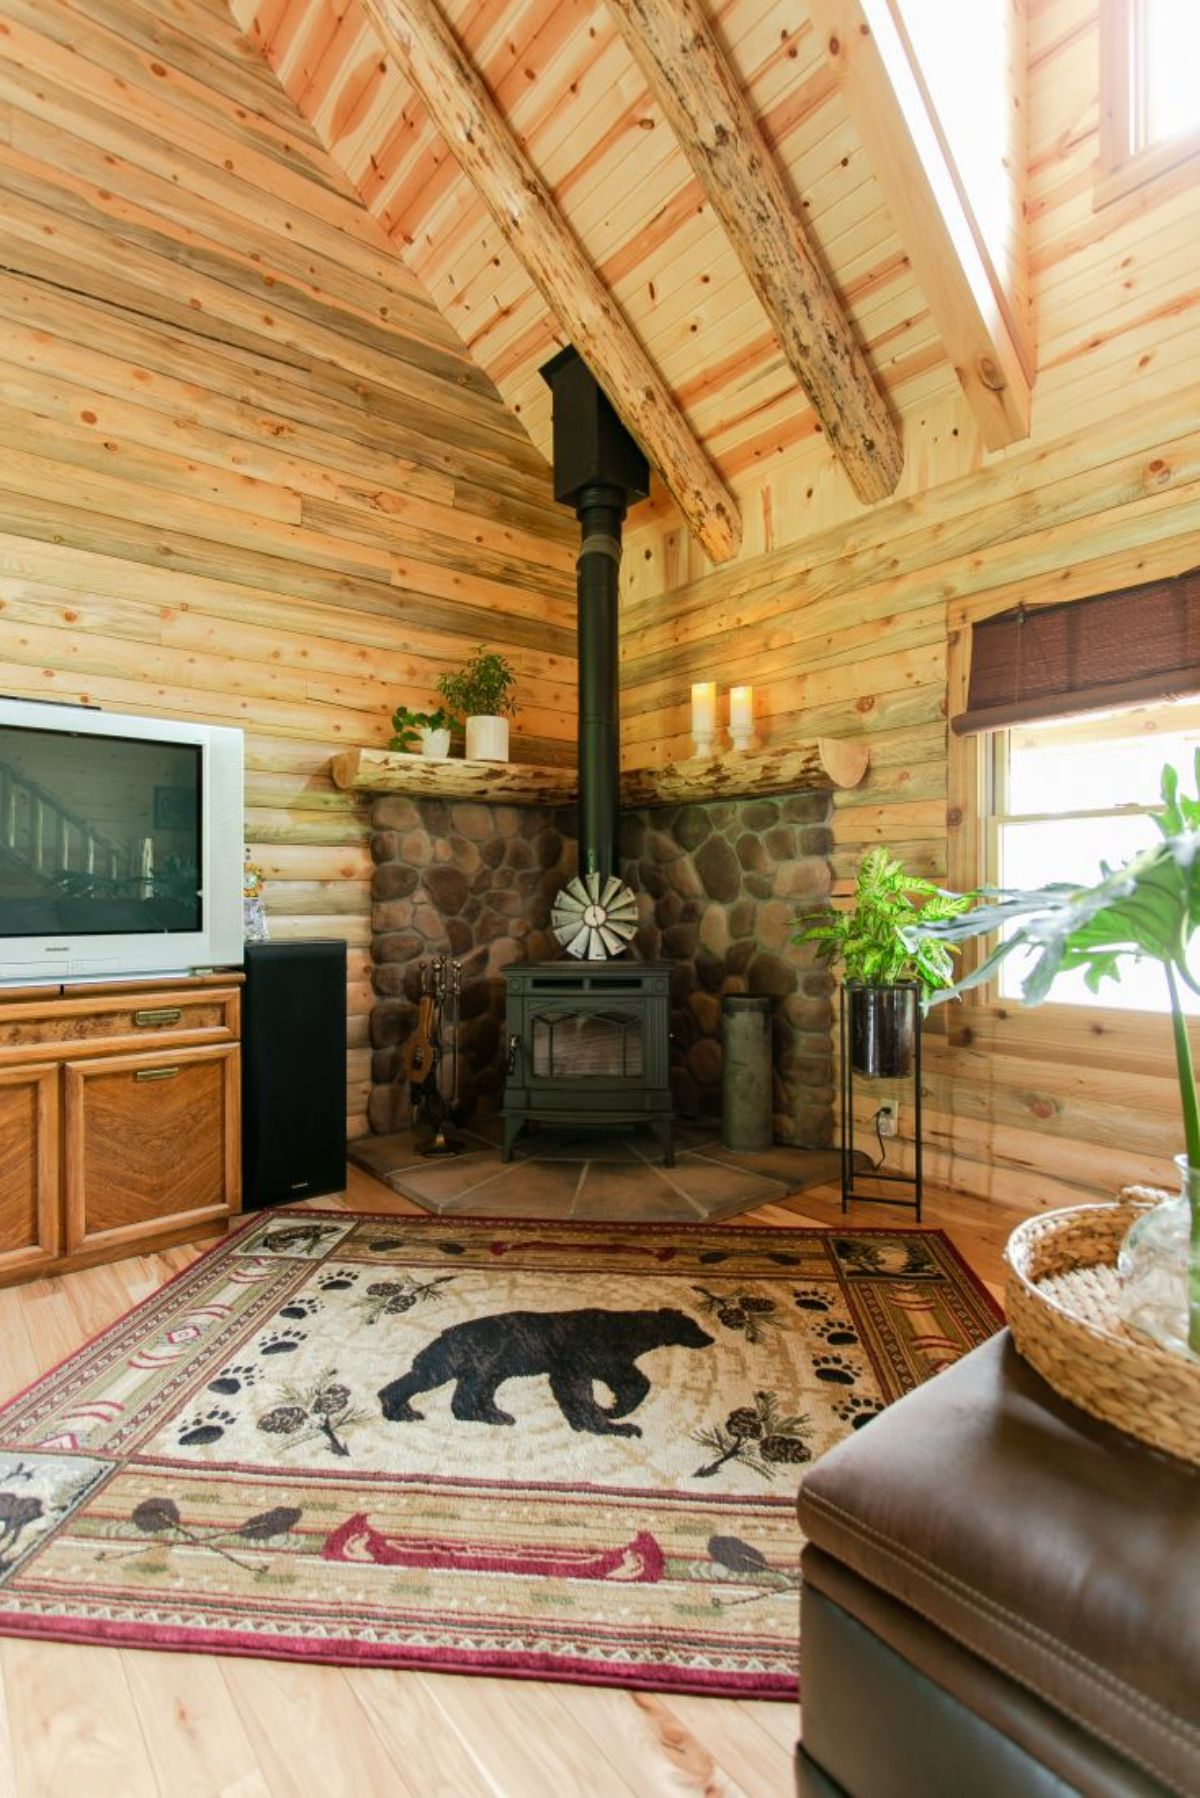 rug with bear on it in front of wood stove with stone background